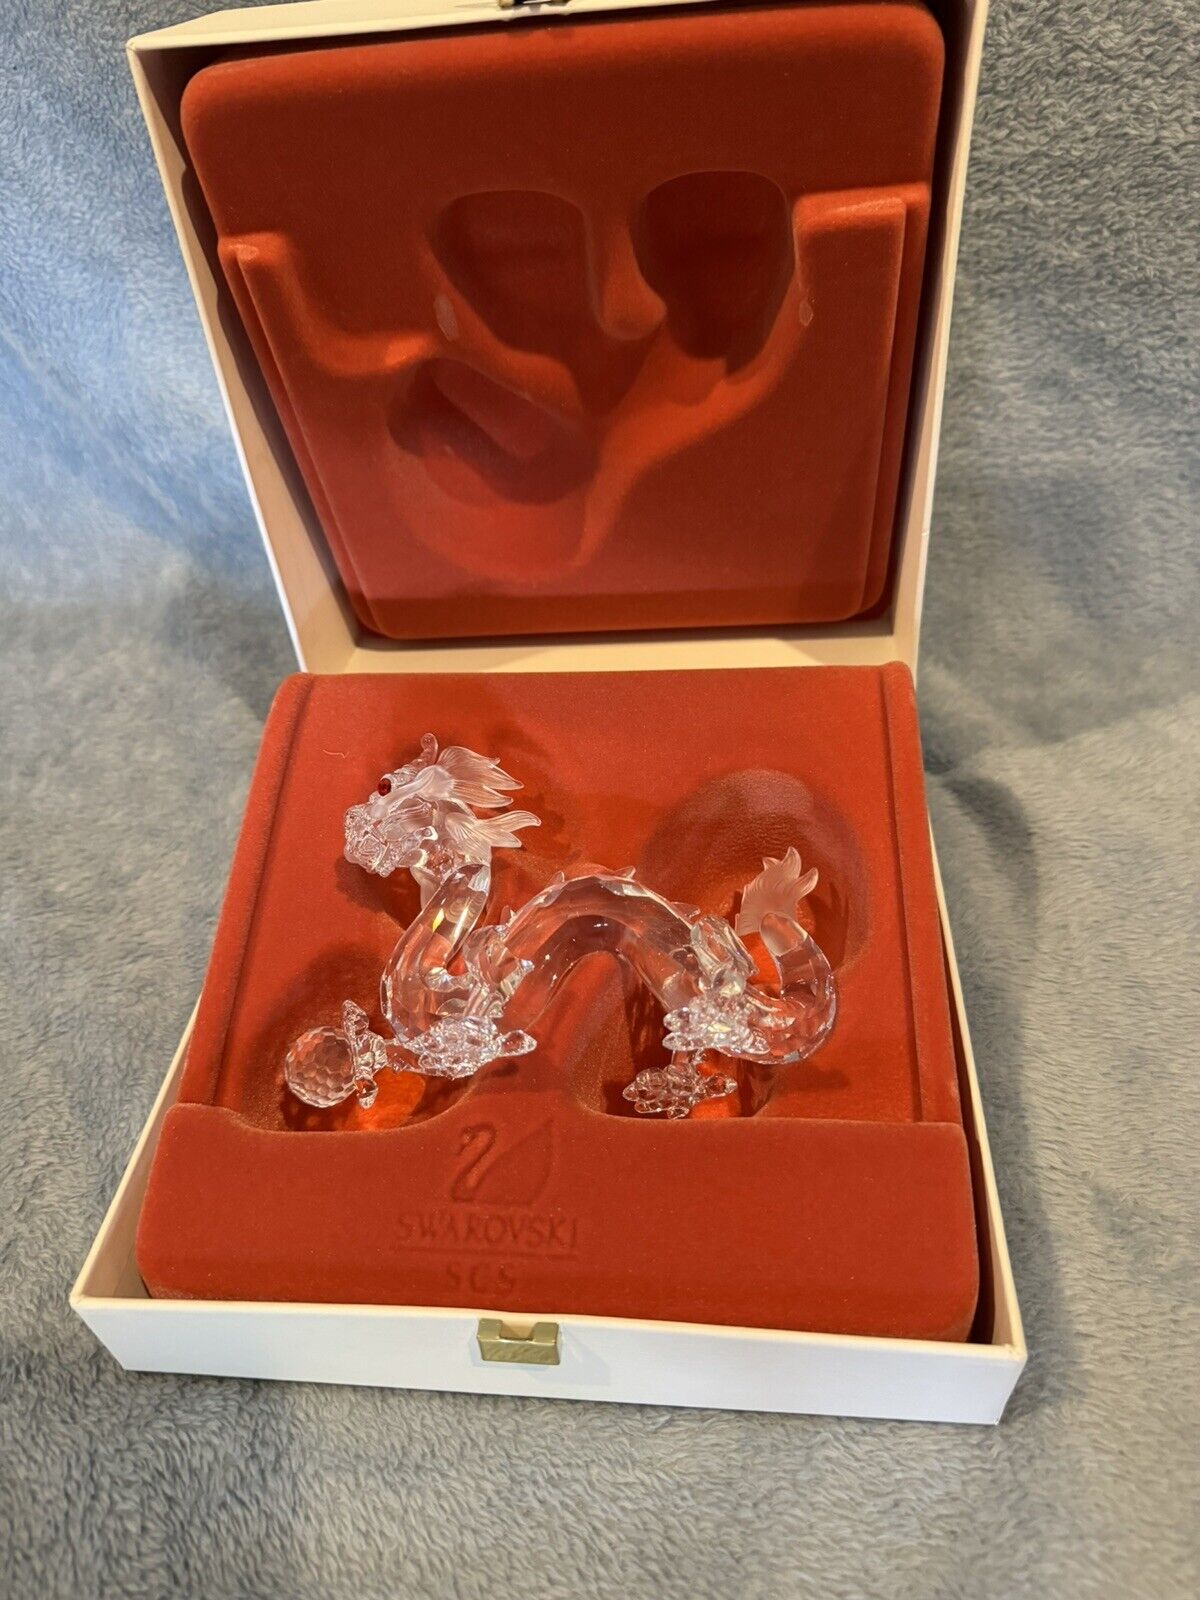 SWAROVSKI CRYSTAL SCS 2nd Annual Edition 1997 " The Dragon" Fabulous Creatures